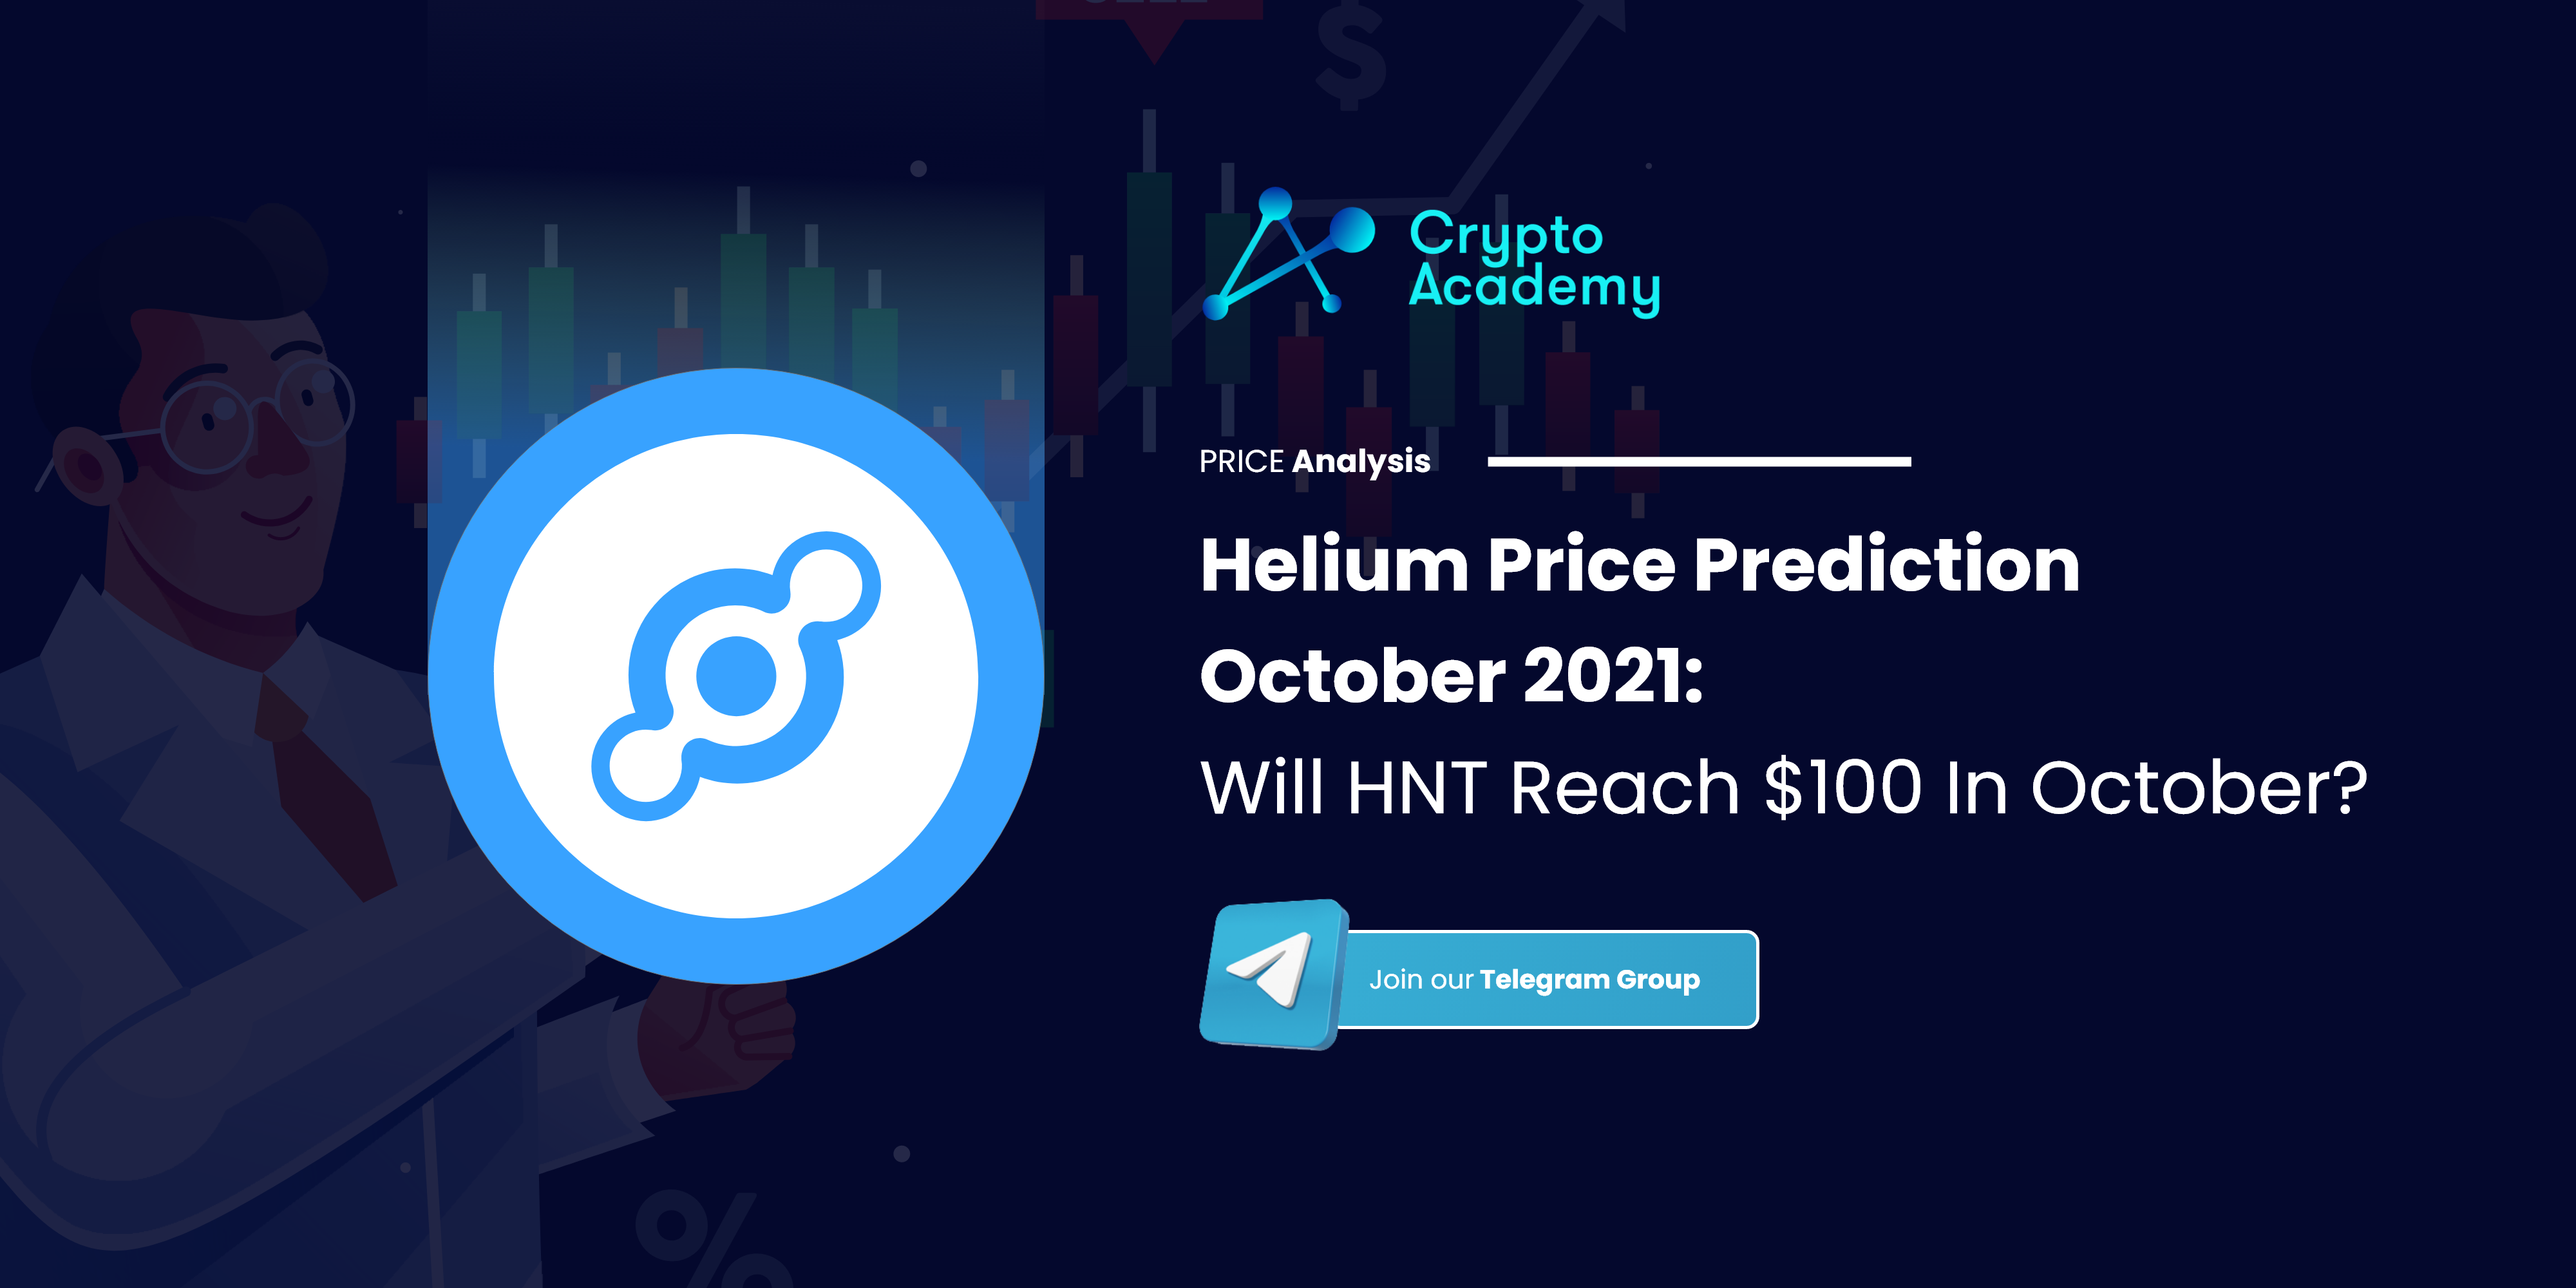 Helium Price Prediction October 2021: Will HNT Reach $100 In October?